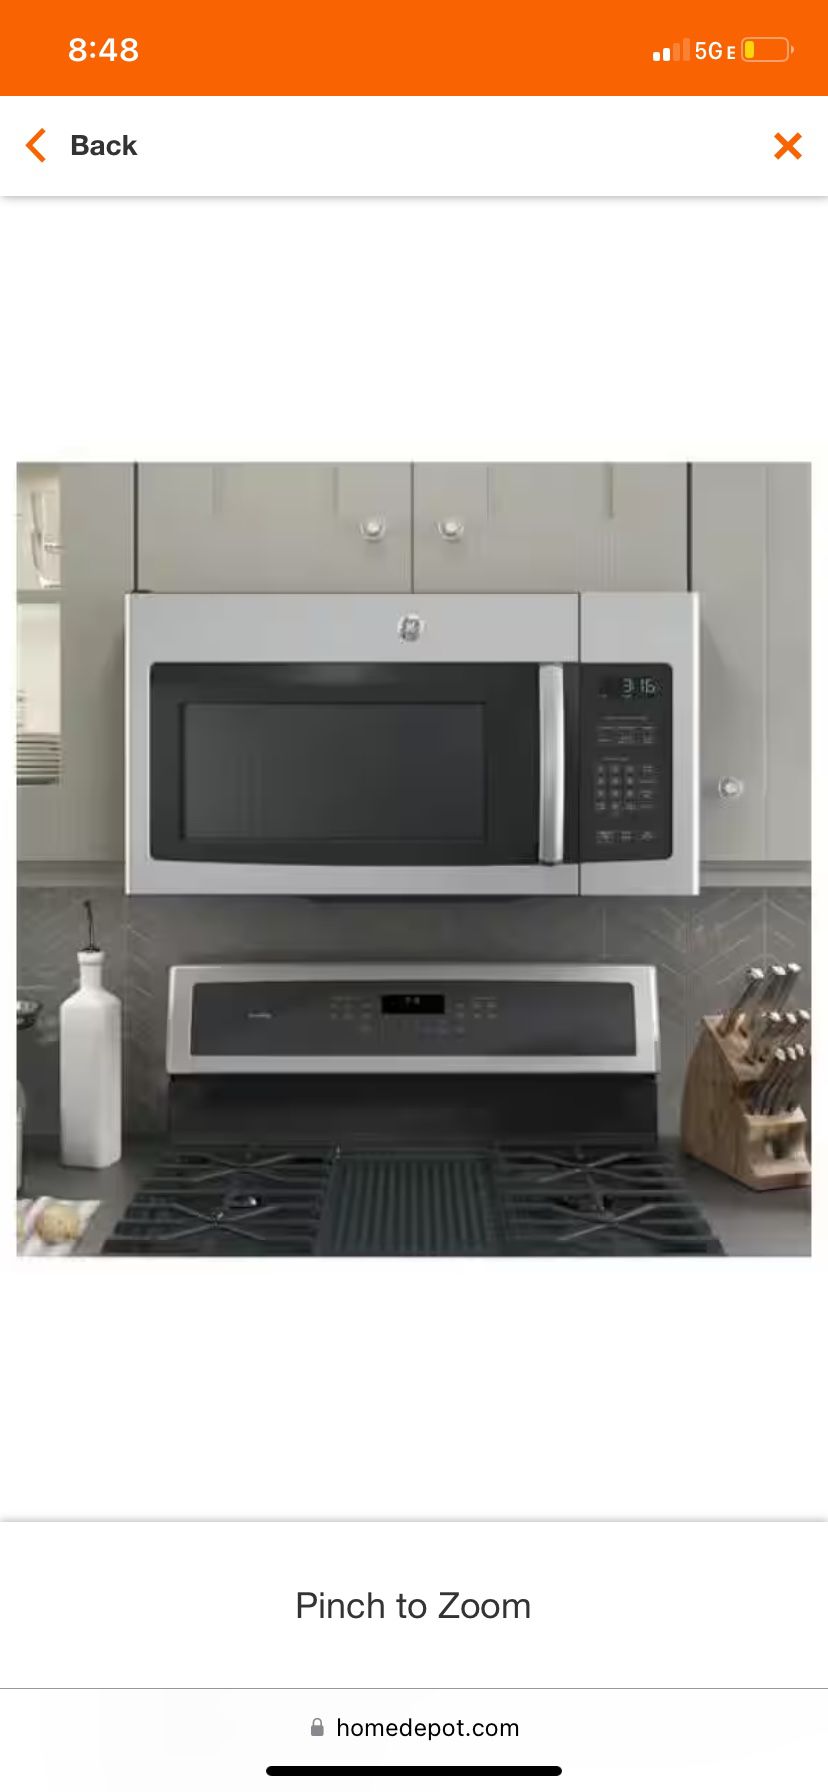 Over The Range Microwave Oven 